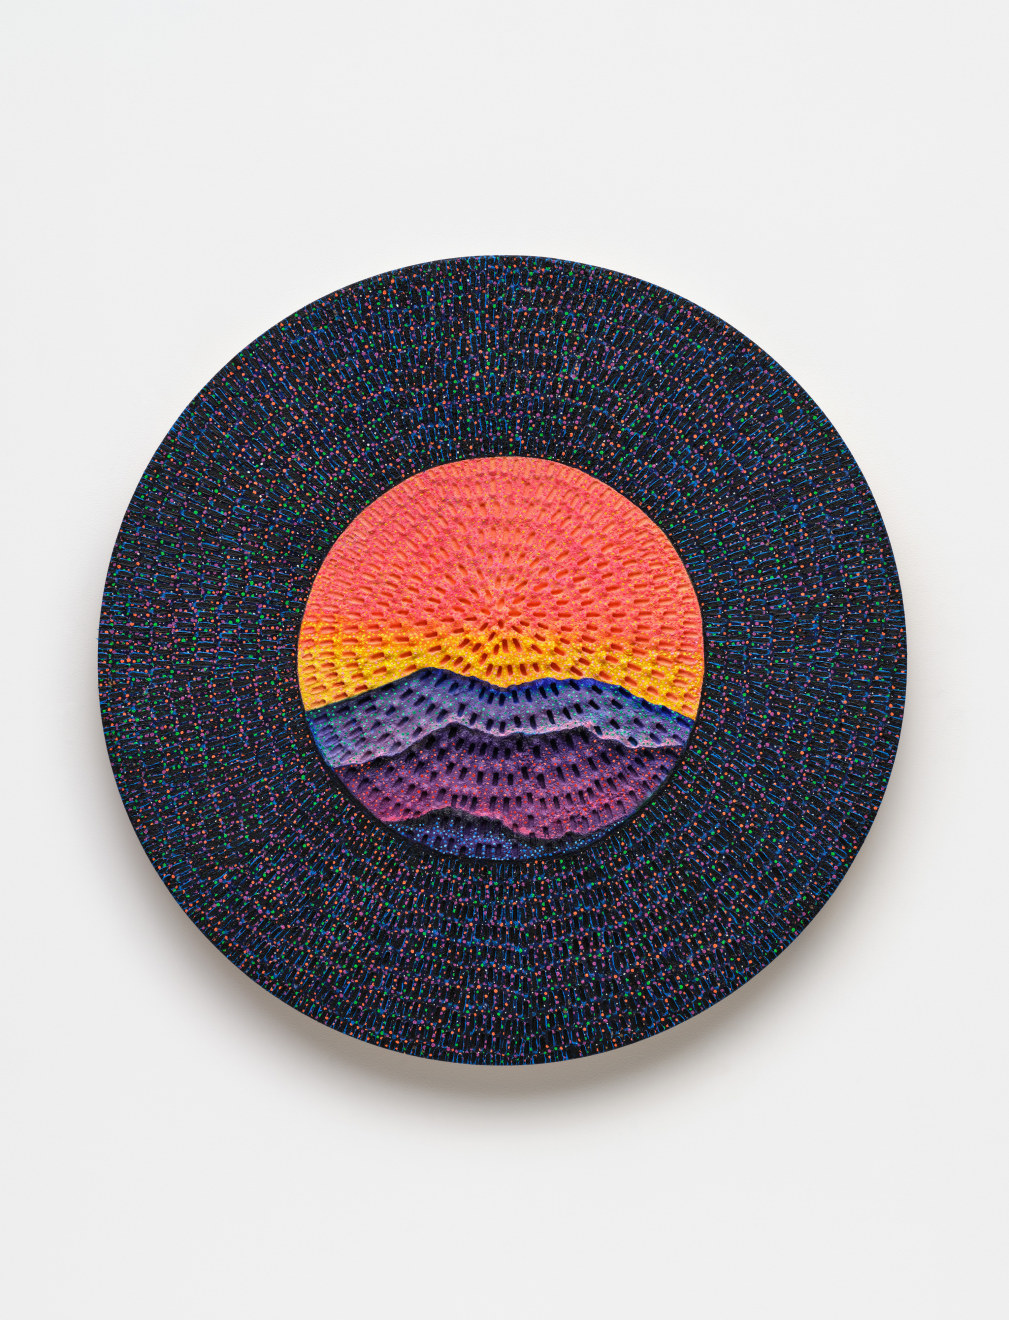 Jennifer Guidi, The Various Planes on Being and Life (Painted Natural Sand, Red-Orange-Yellow-Blue-Purple-Dark Purple Mountain, Painted Black Sand, Yellow, Red, Pink, Green and Orange, Painted Black Sand, Blue, Yellow, Green, Pink, Black Ground), 2022